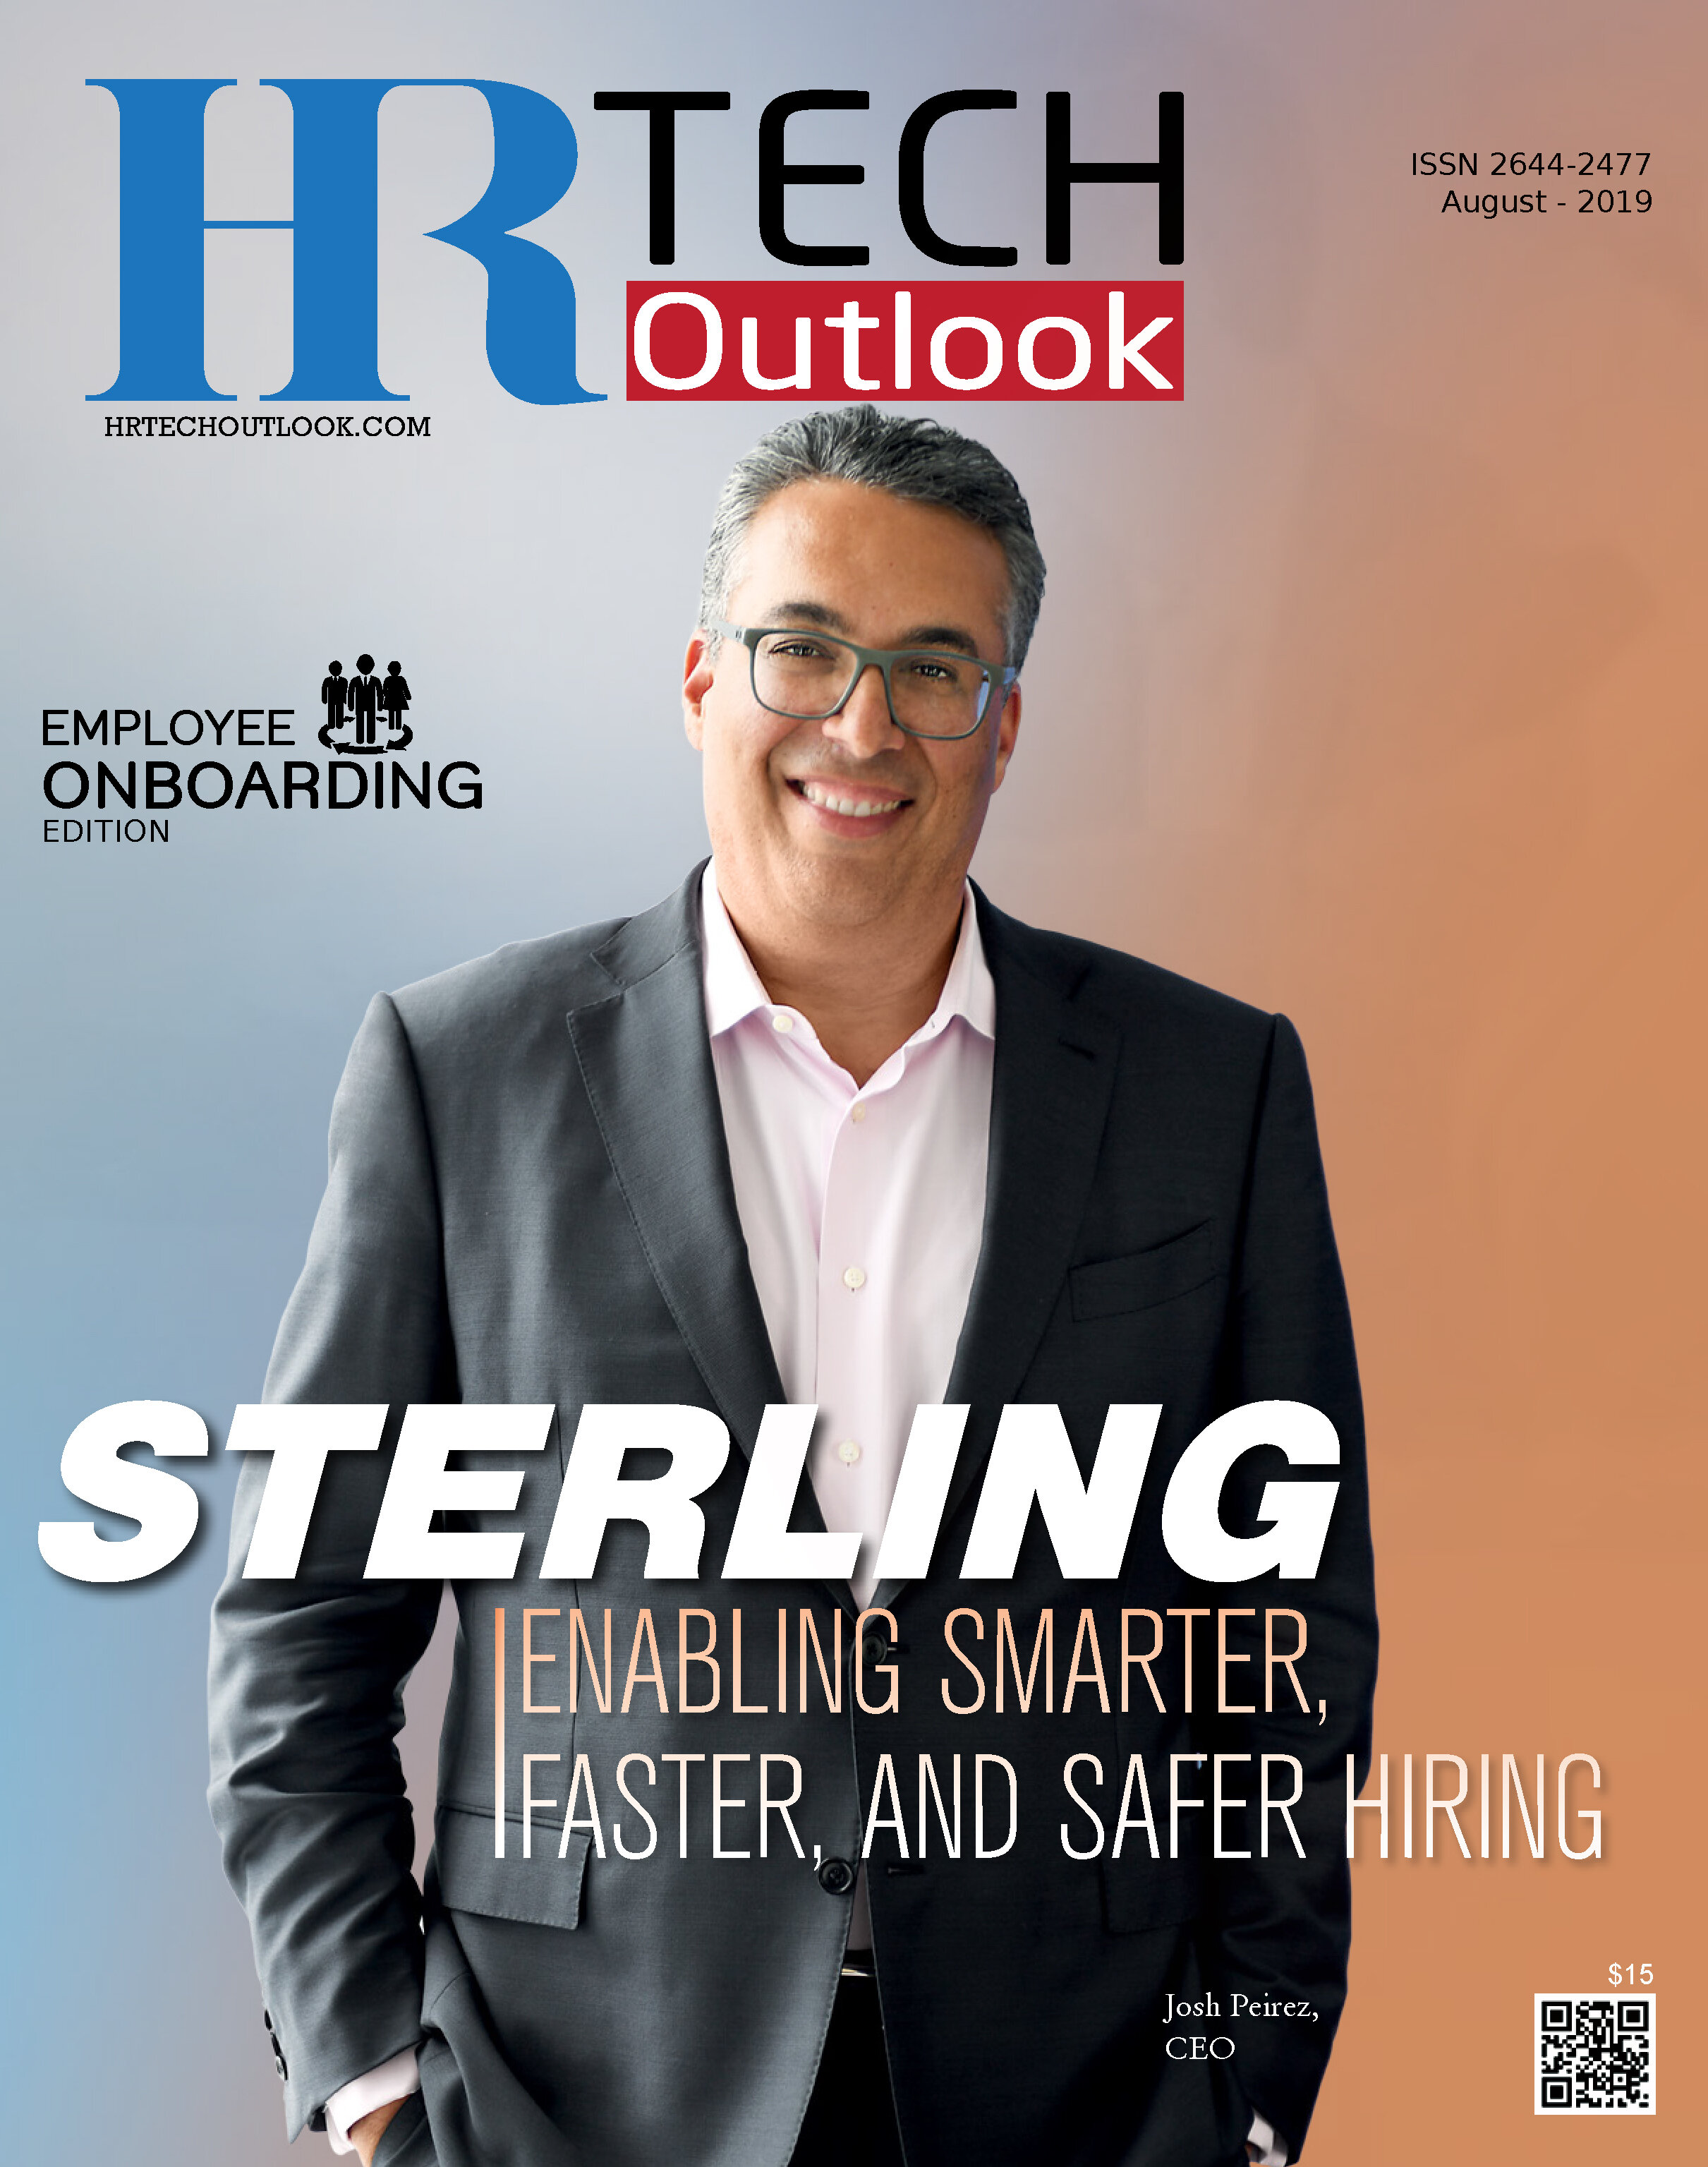 Sterling HR Tech Outlook Cover August 2019 - photo by Andrew Werner.jpg